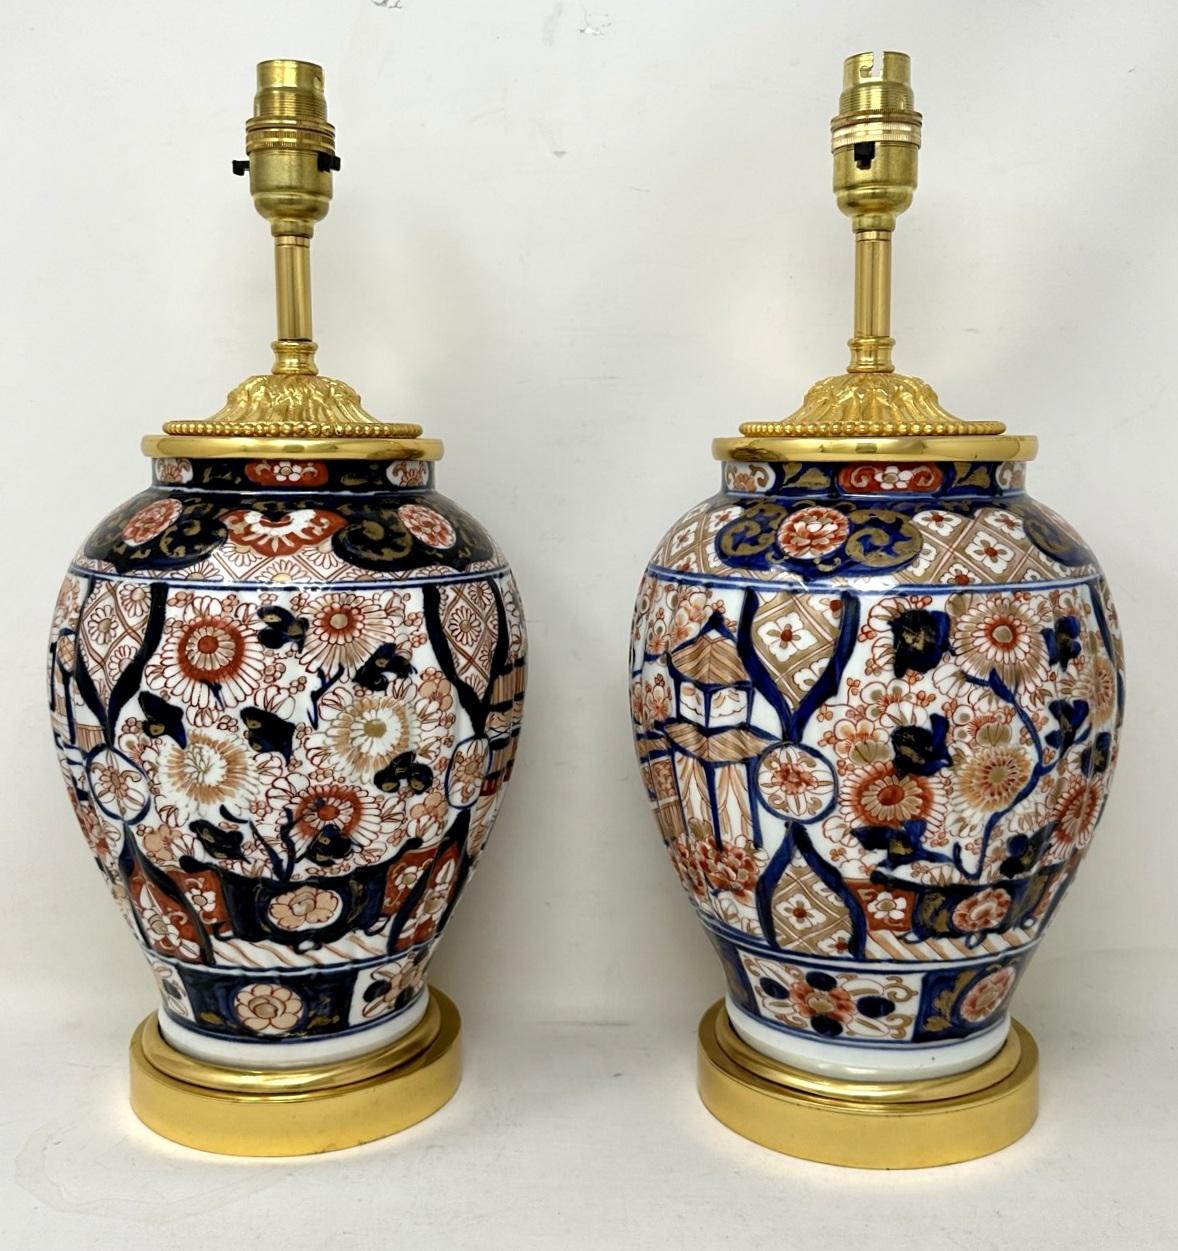 Stunning pair traditional japanese imari bulbous form porcelain vases of medium to large proportions, now converted to a pair of electric table lamps, complete with ormolu stepped circular bases and later highly decorative ormolu mounts. First half